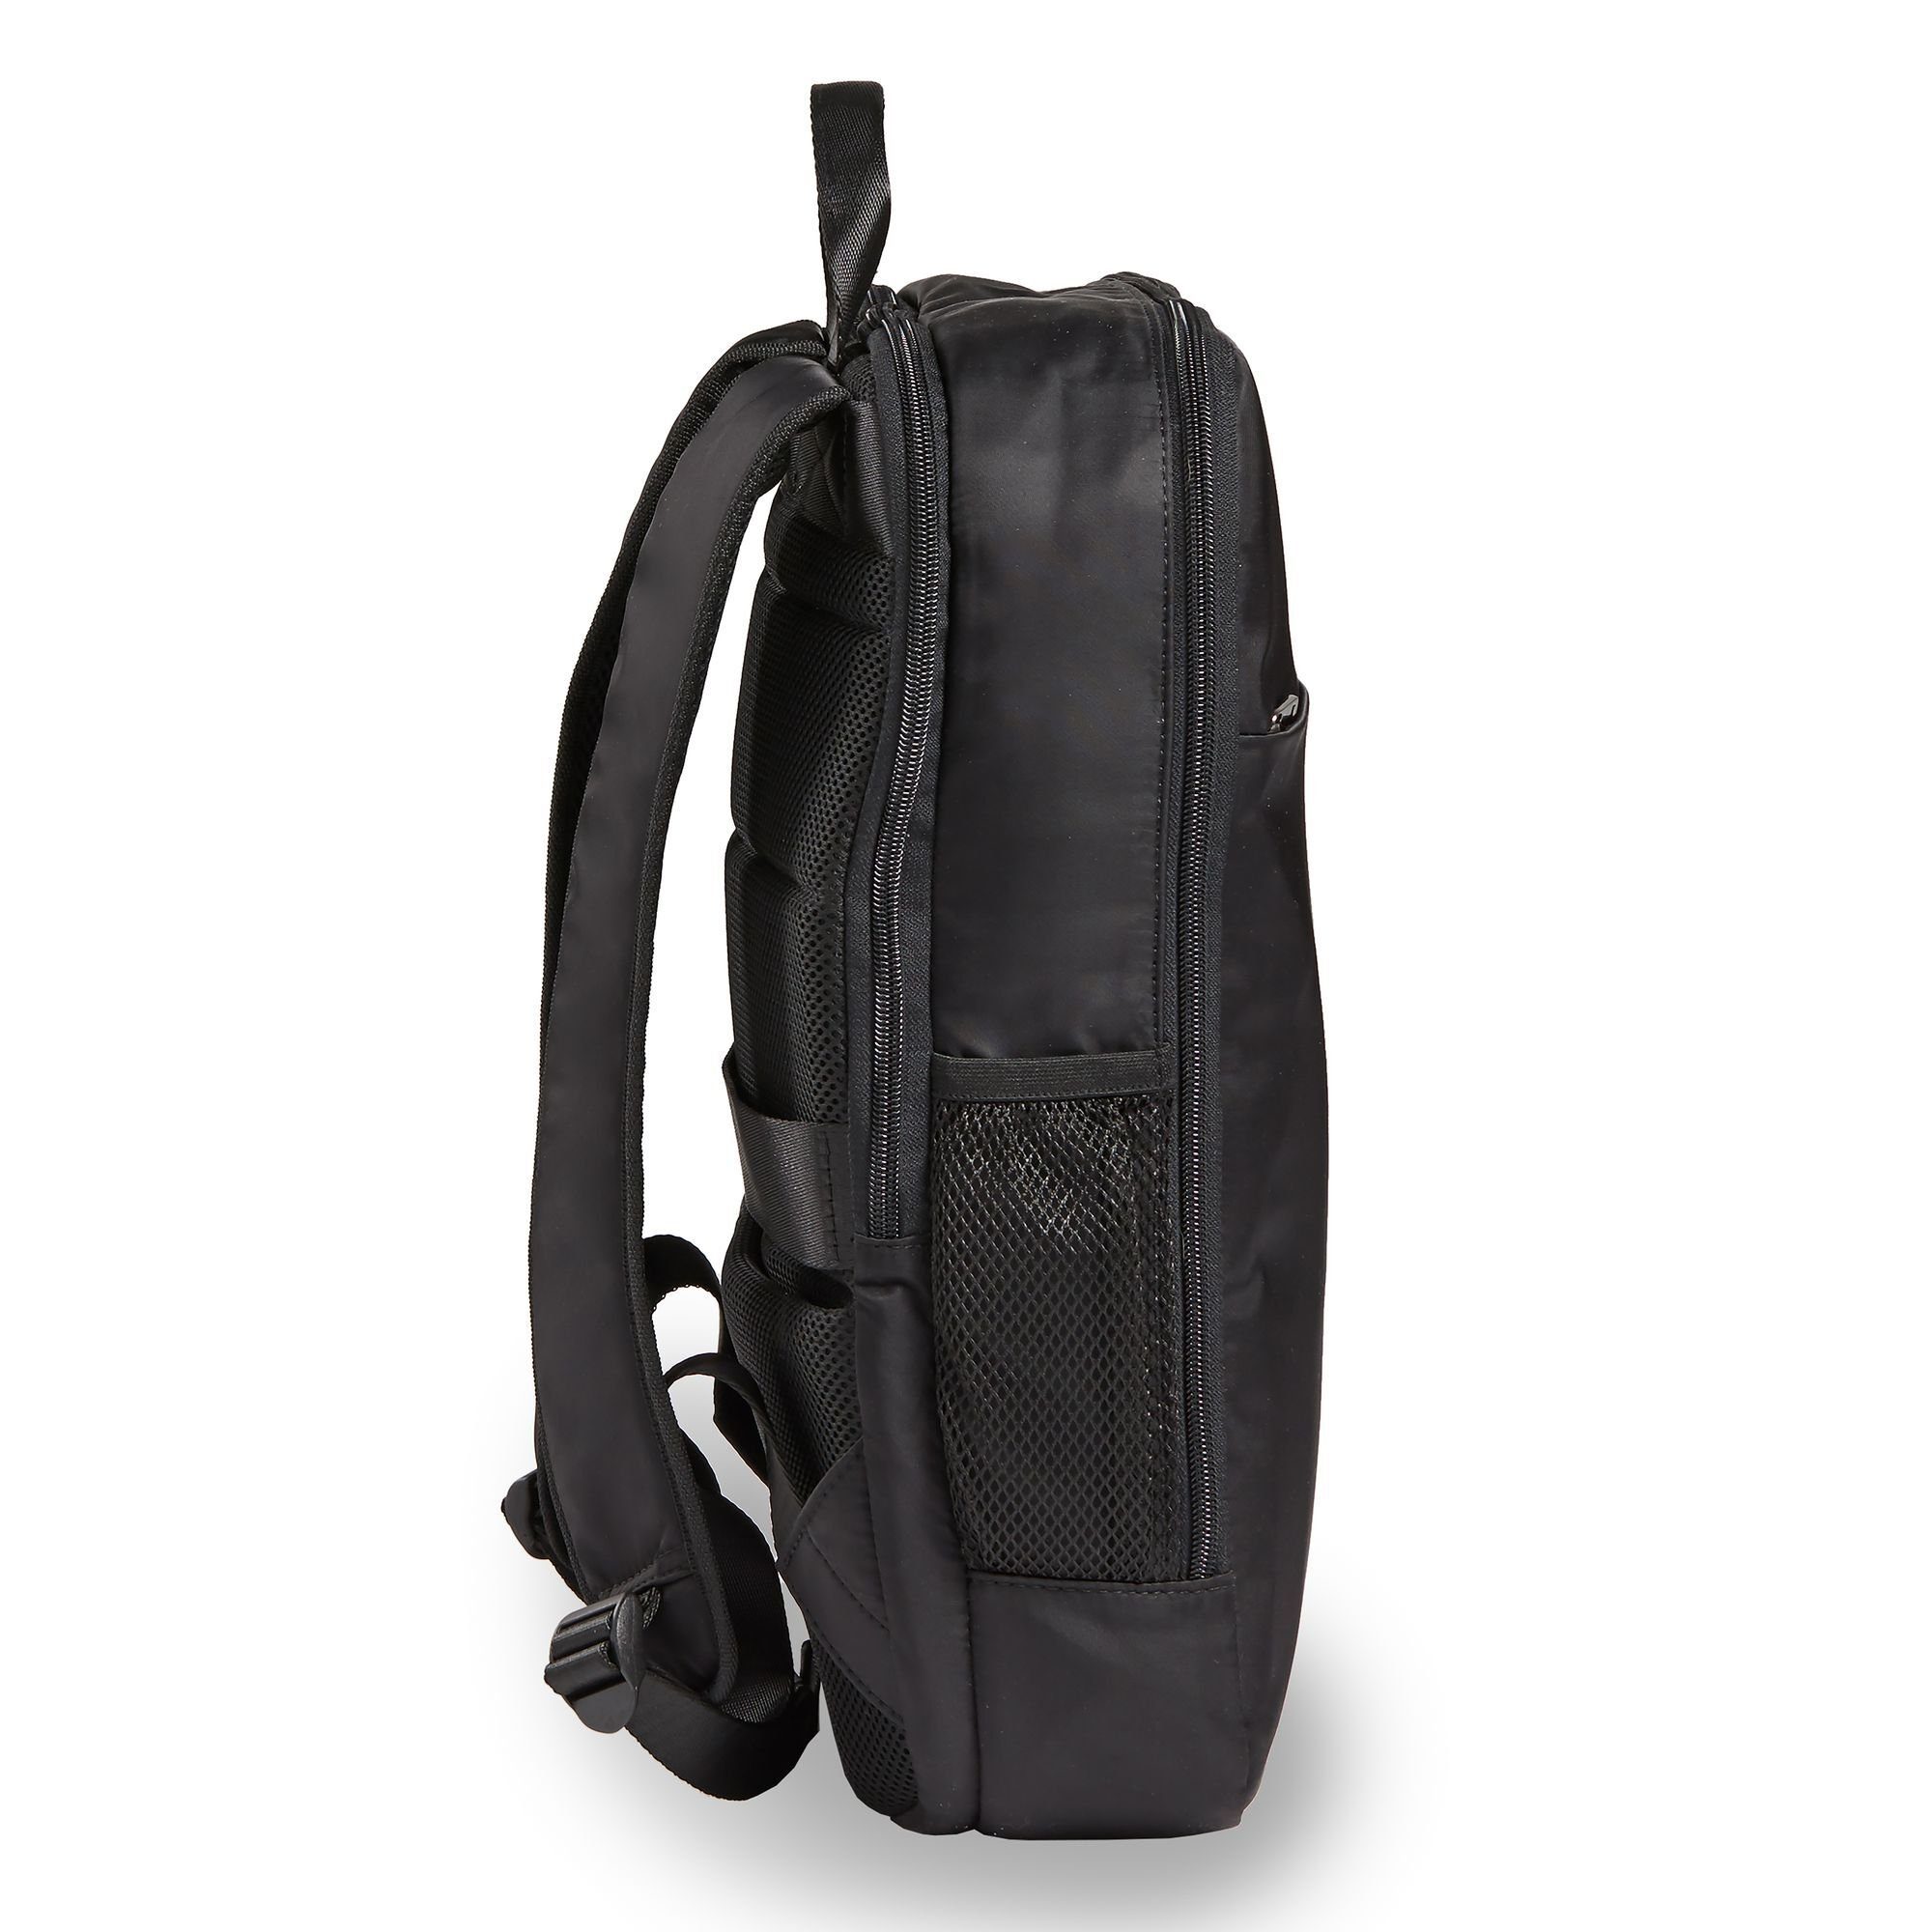 Pure, black Stratic Daypack Polyester